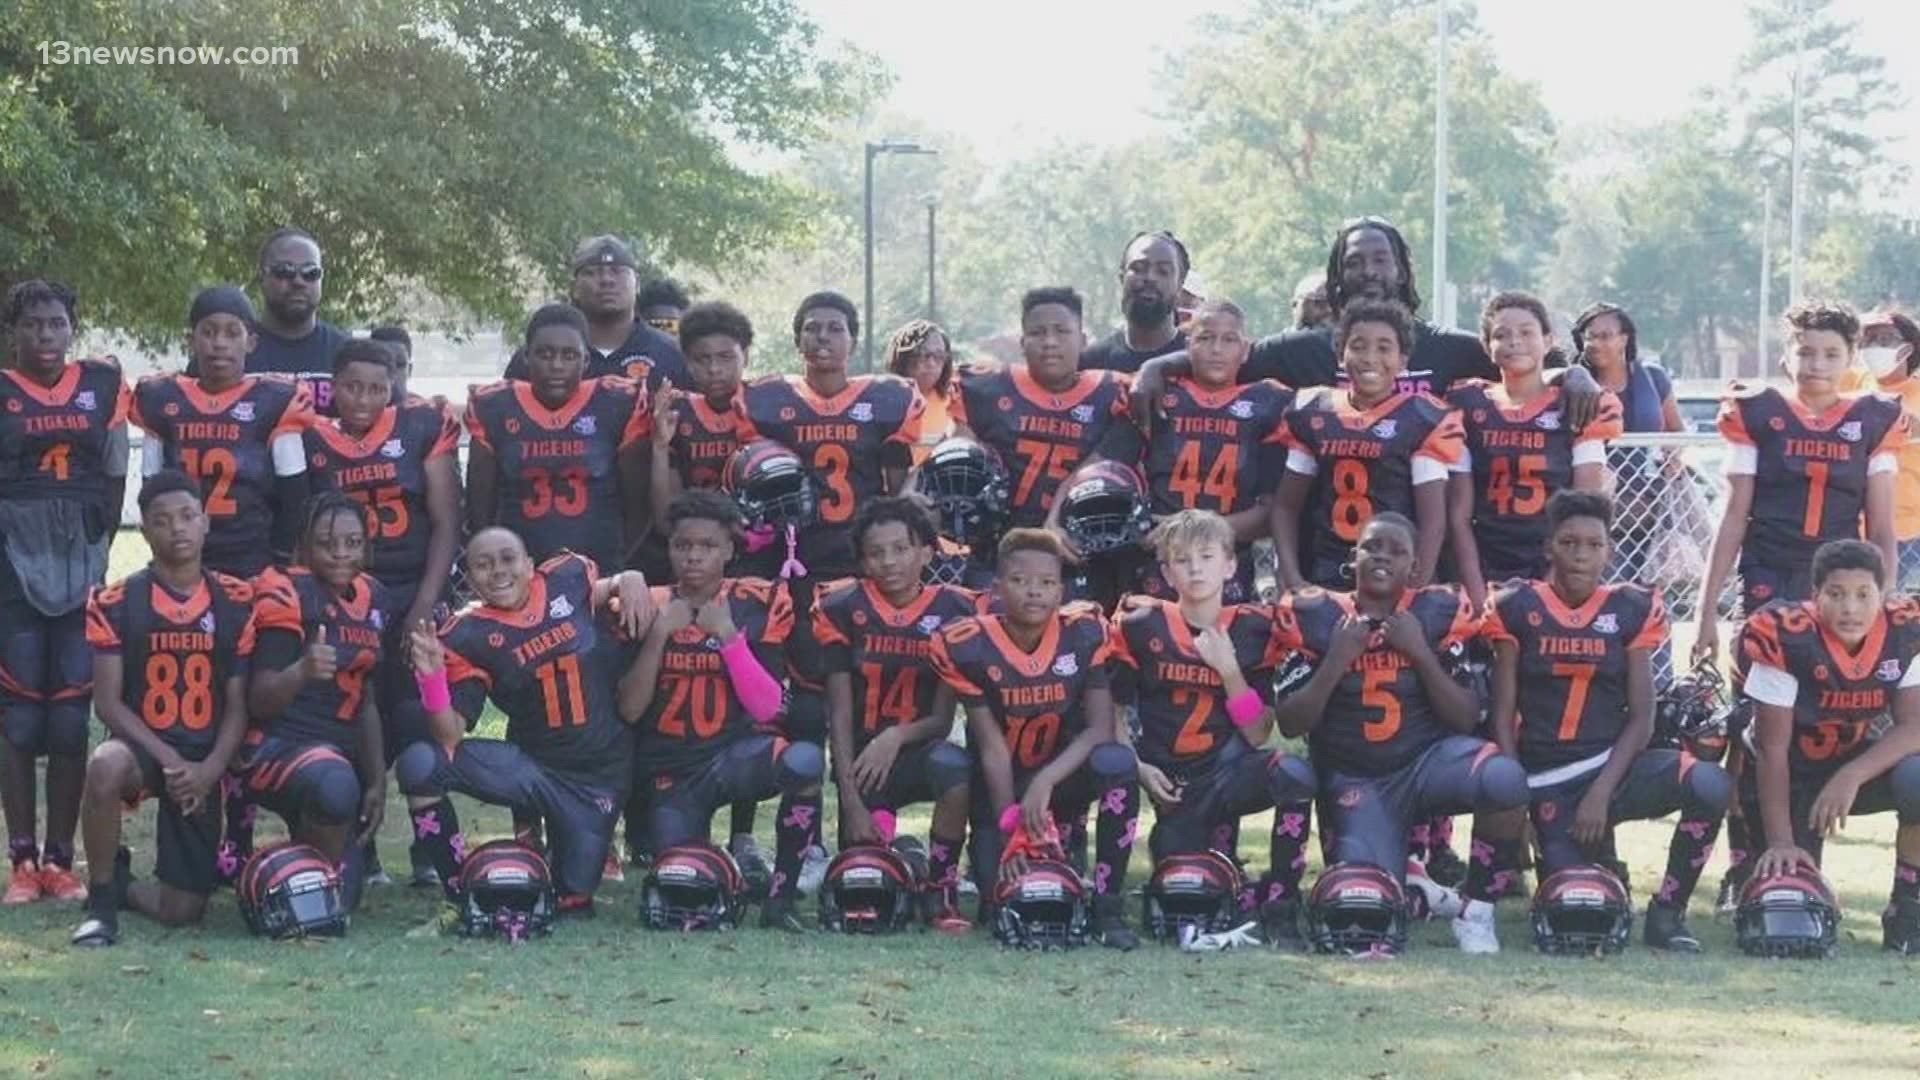 The Churchland Tigers 12u Black team, known as "The Squad," put in the work to become regional champions. Now, the team hopes to bring home the national title.